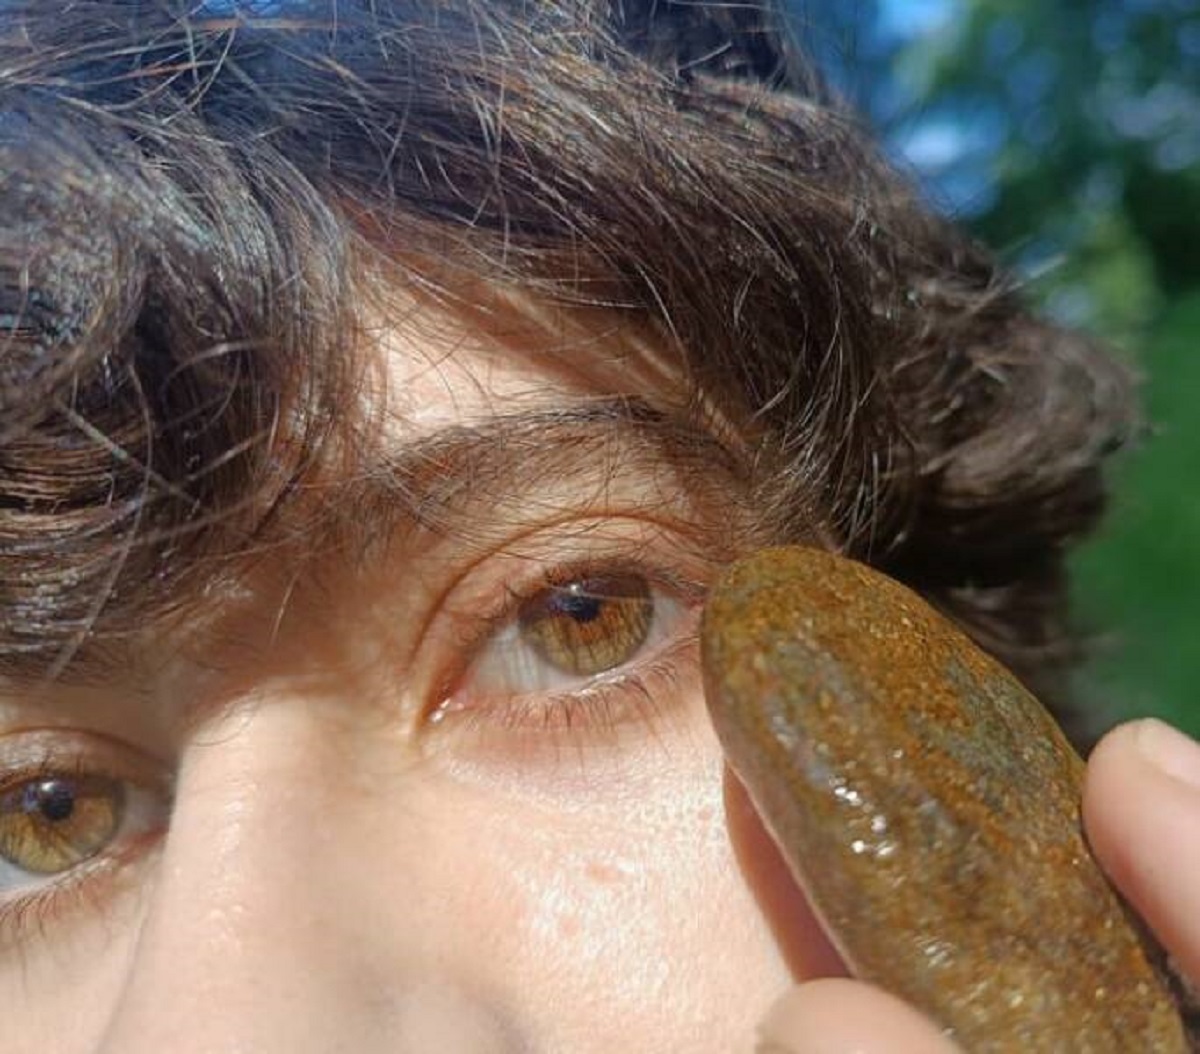 "My girlfriend found a river stone that matches my eyecolor exactly"